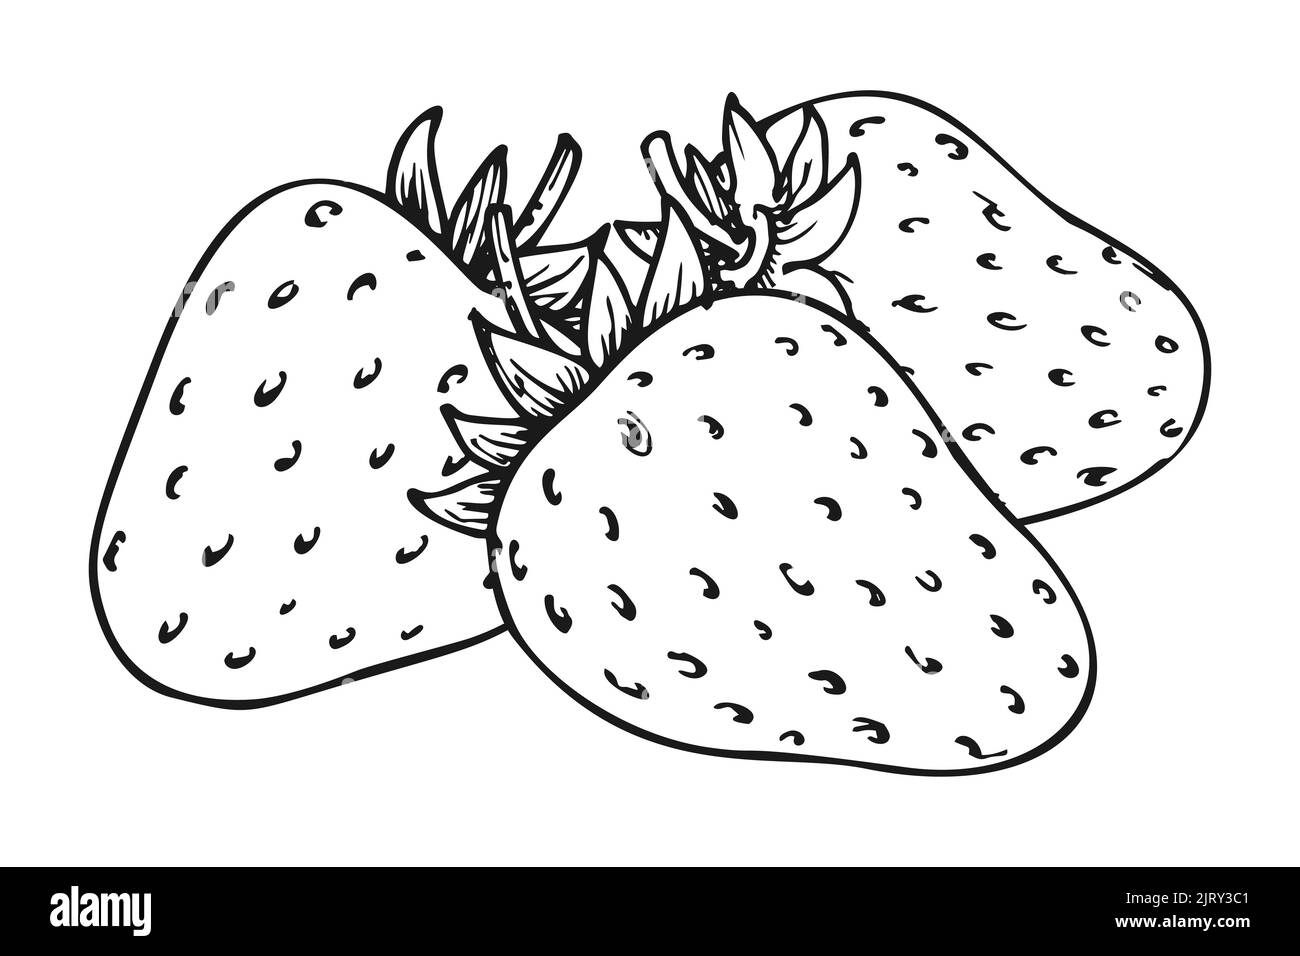 Strawberry group of three berries. Children and adults coloring book page. Whole ripe wild forest berry. Tasty sweet farm fresh organic fruit. Juicy strawberries handdrawn clip art black white sketch Stock Vector